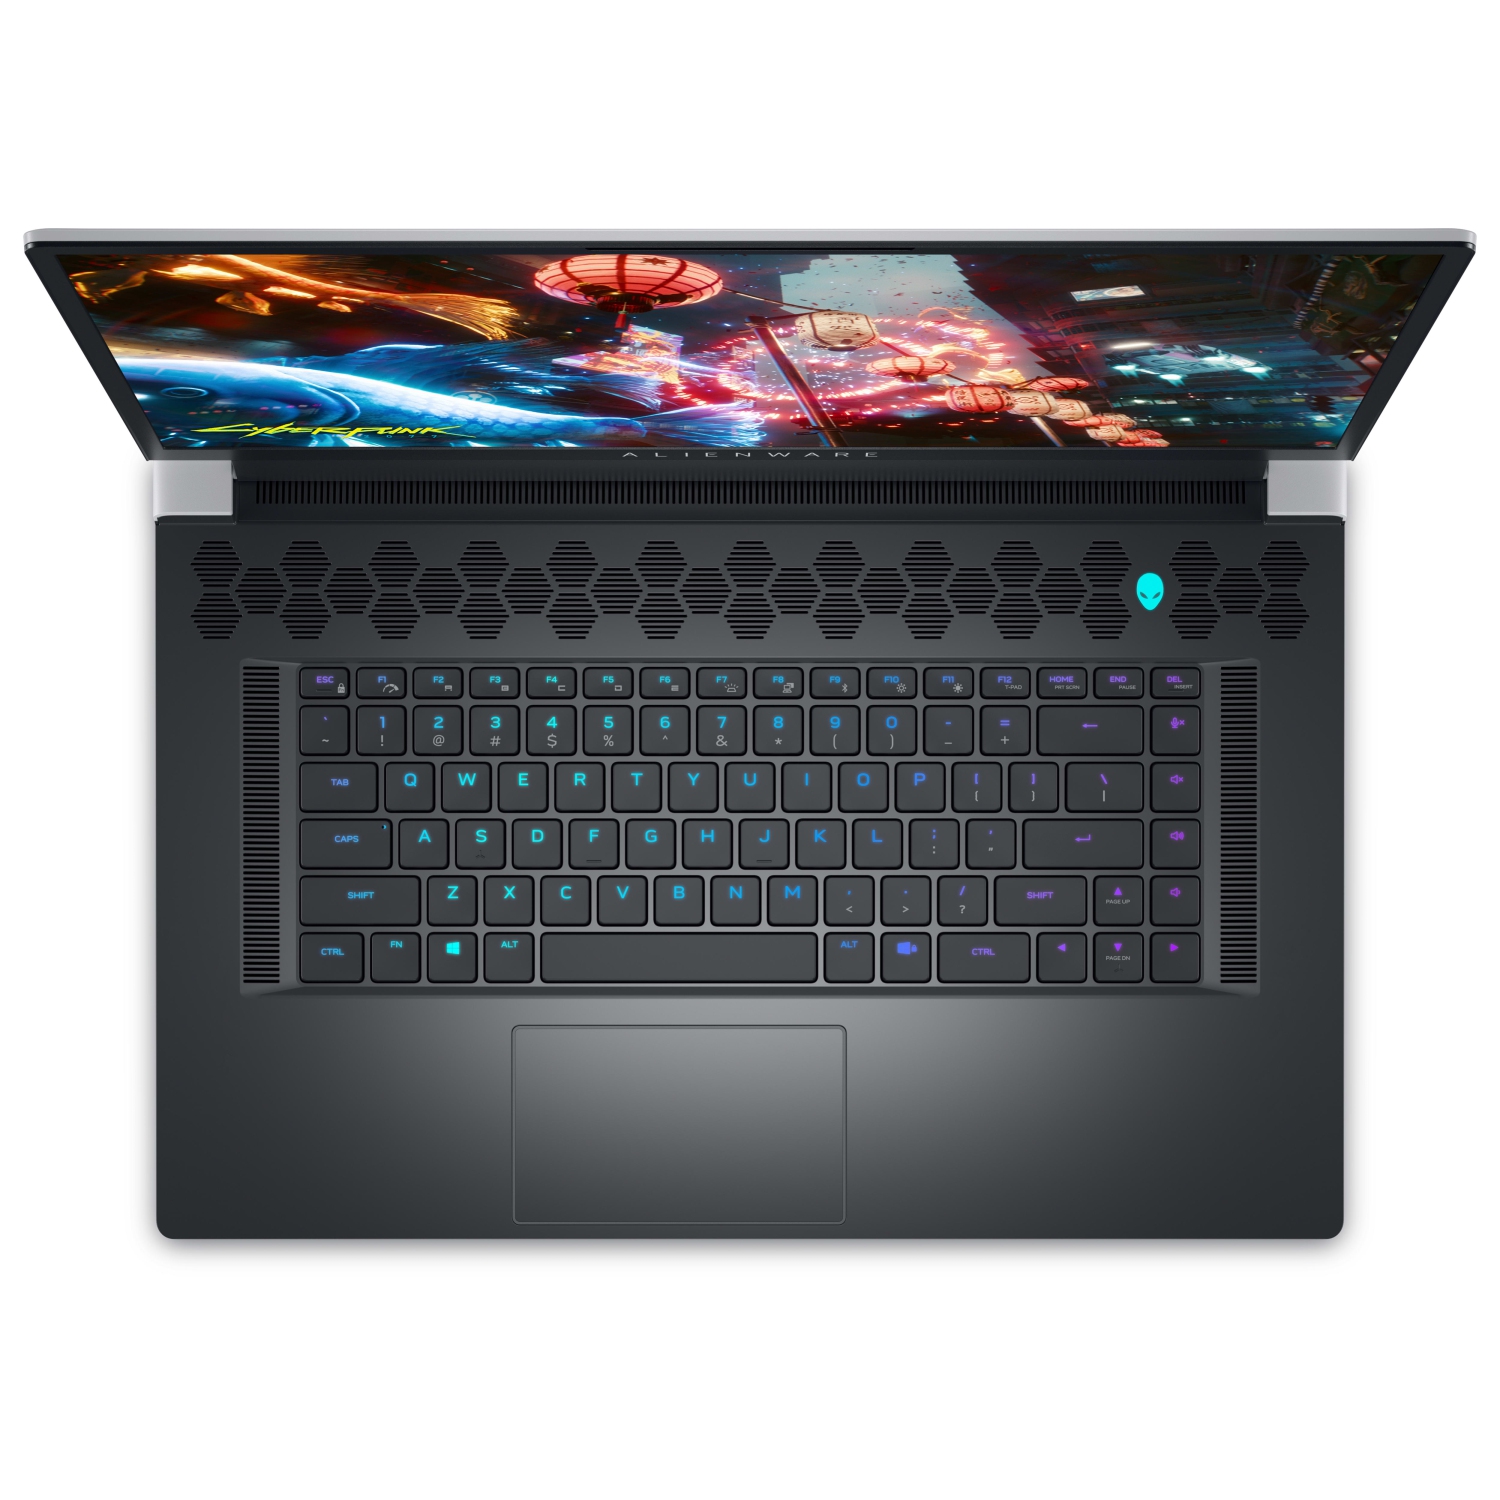 Refurbished (Excellent) – Dell Alienware X17 R2 Gaming Laptop (2022) | 17.3" FHD | Core i9 - 1TB SSD - 64GB RAM - 3080 Ti | 14 Cores @ 5 GHz - 12th Gen CPU - 16GB GDDR6X